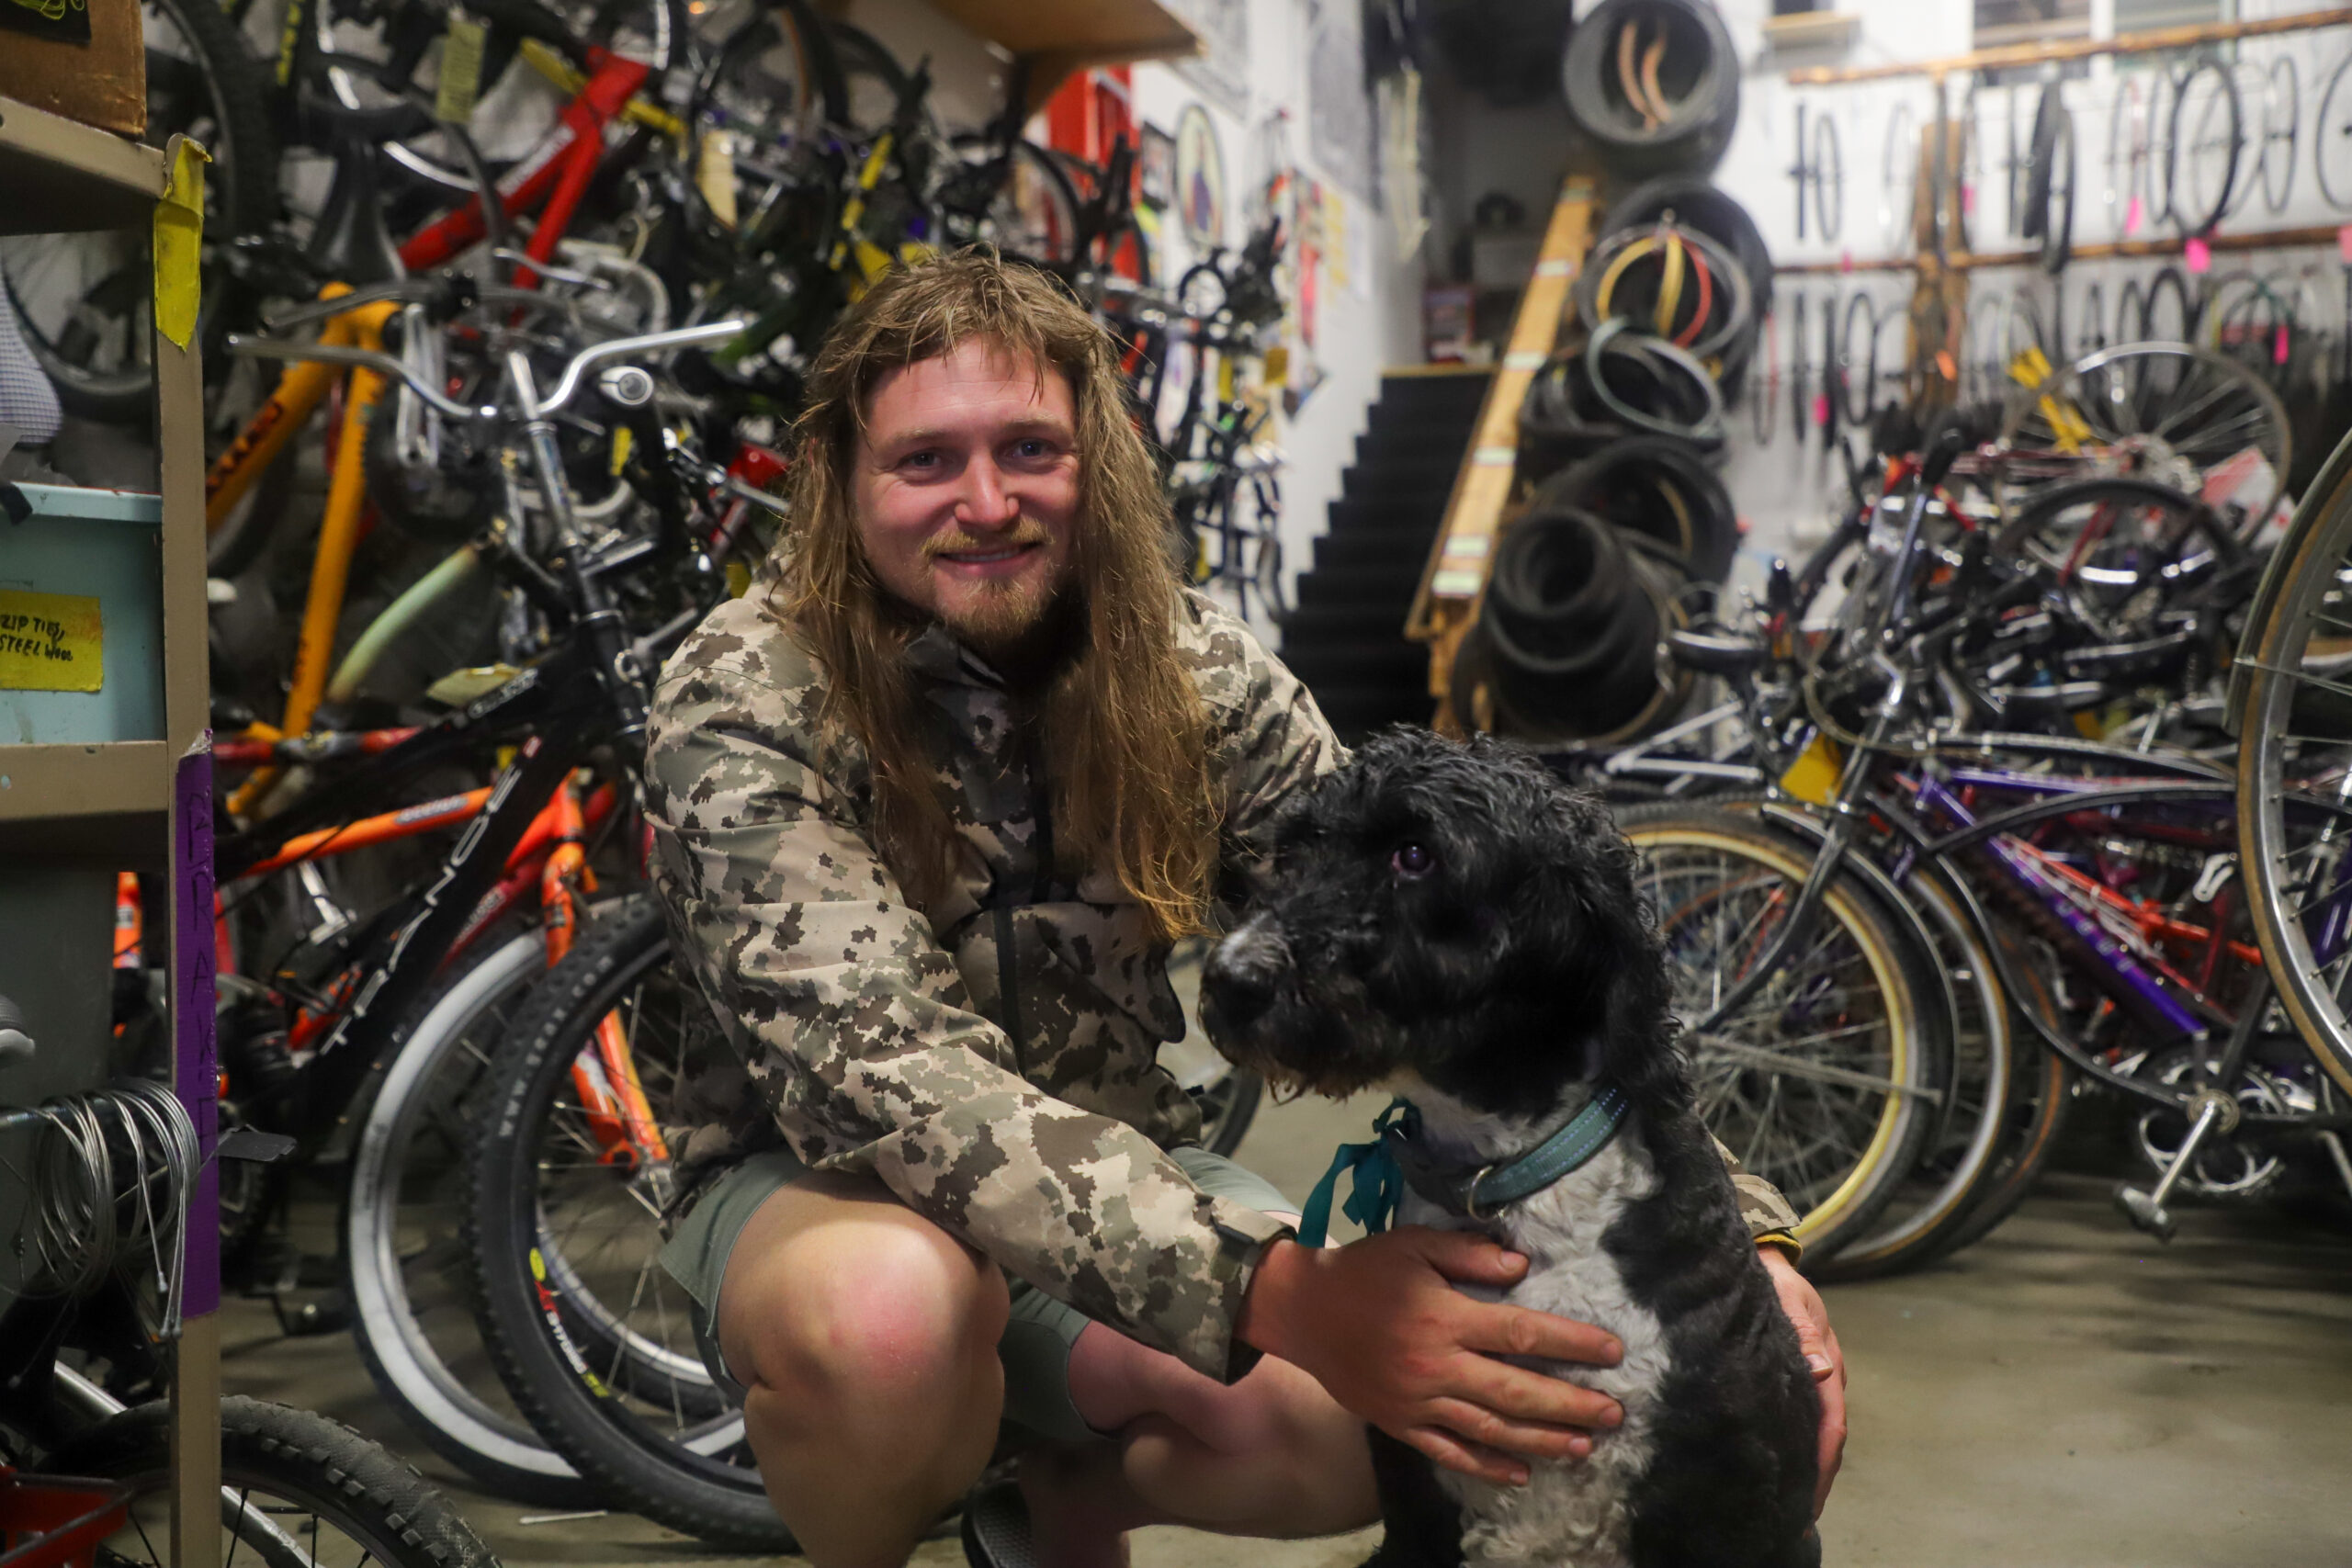 A man with long hair sits next to a black dog in a room filled with bikes.